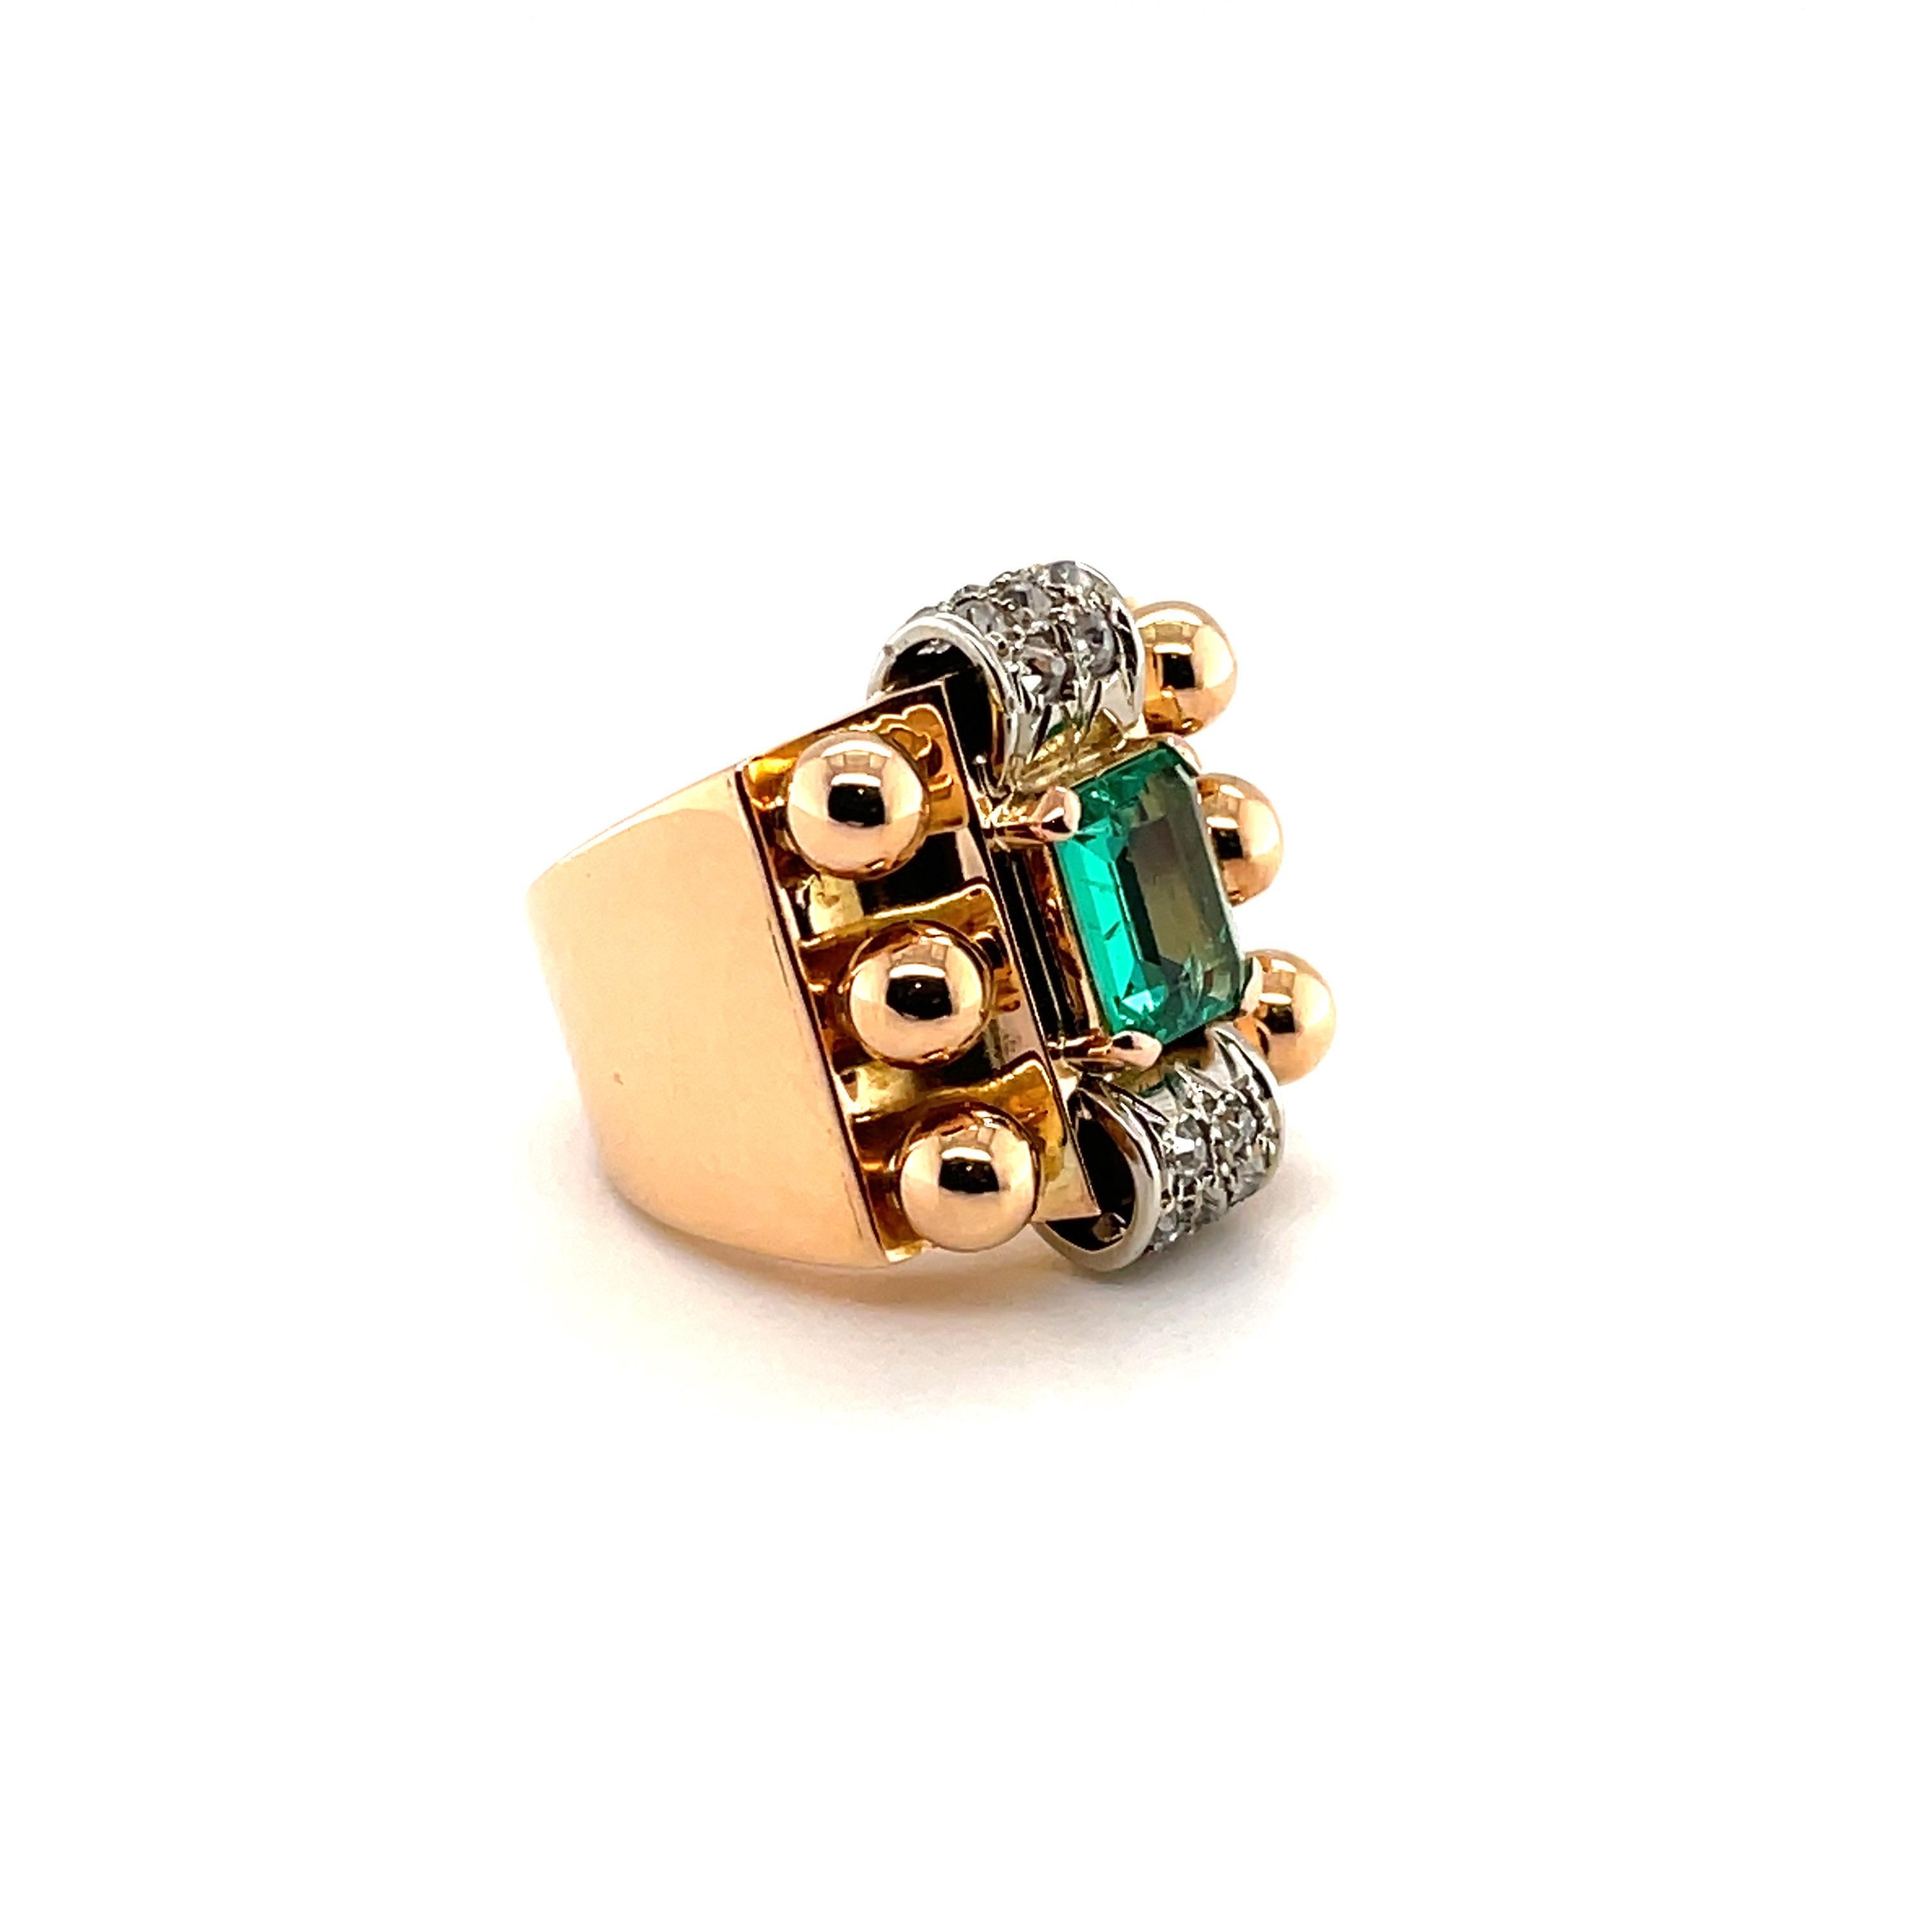 18 karat pink and white gold emerald and diamond Retro cocktail ring, circa 1940. 

Charming Retro cocktail ring of geometric design, centering upon one octagonal emerald of circa 0.9 carats, flanked by two scroll motifs in white gold, decorated